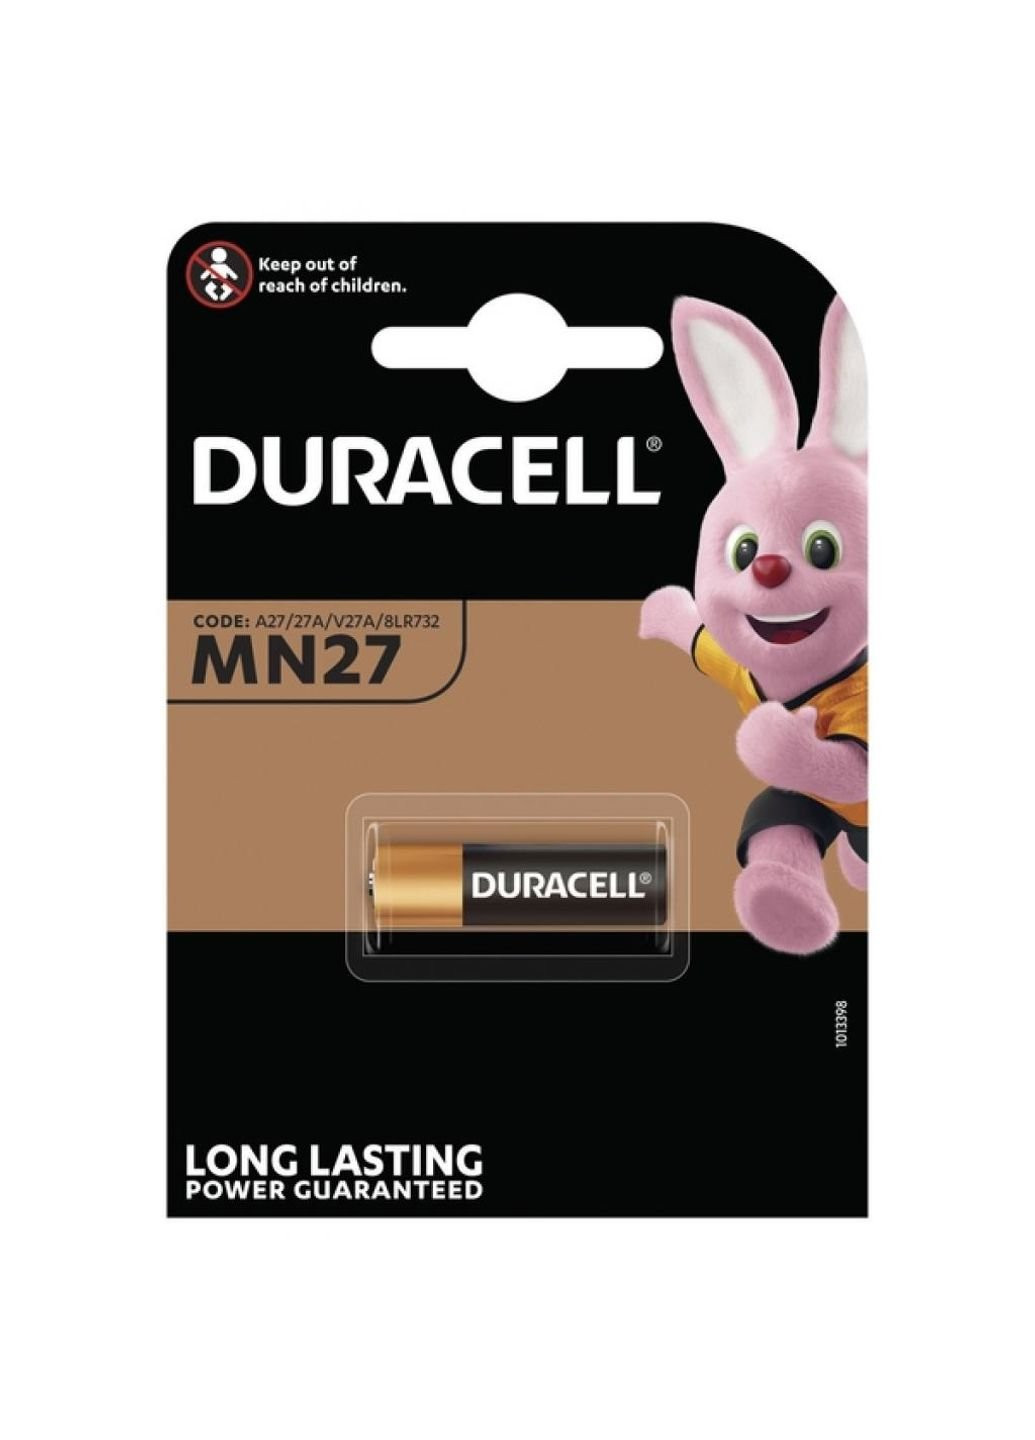 MN27 / A27 акумулятор (5007388) Duracell (251412319)